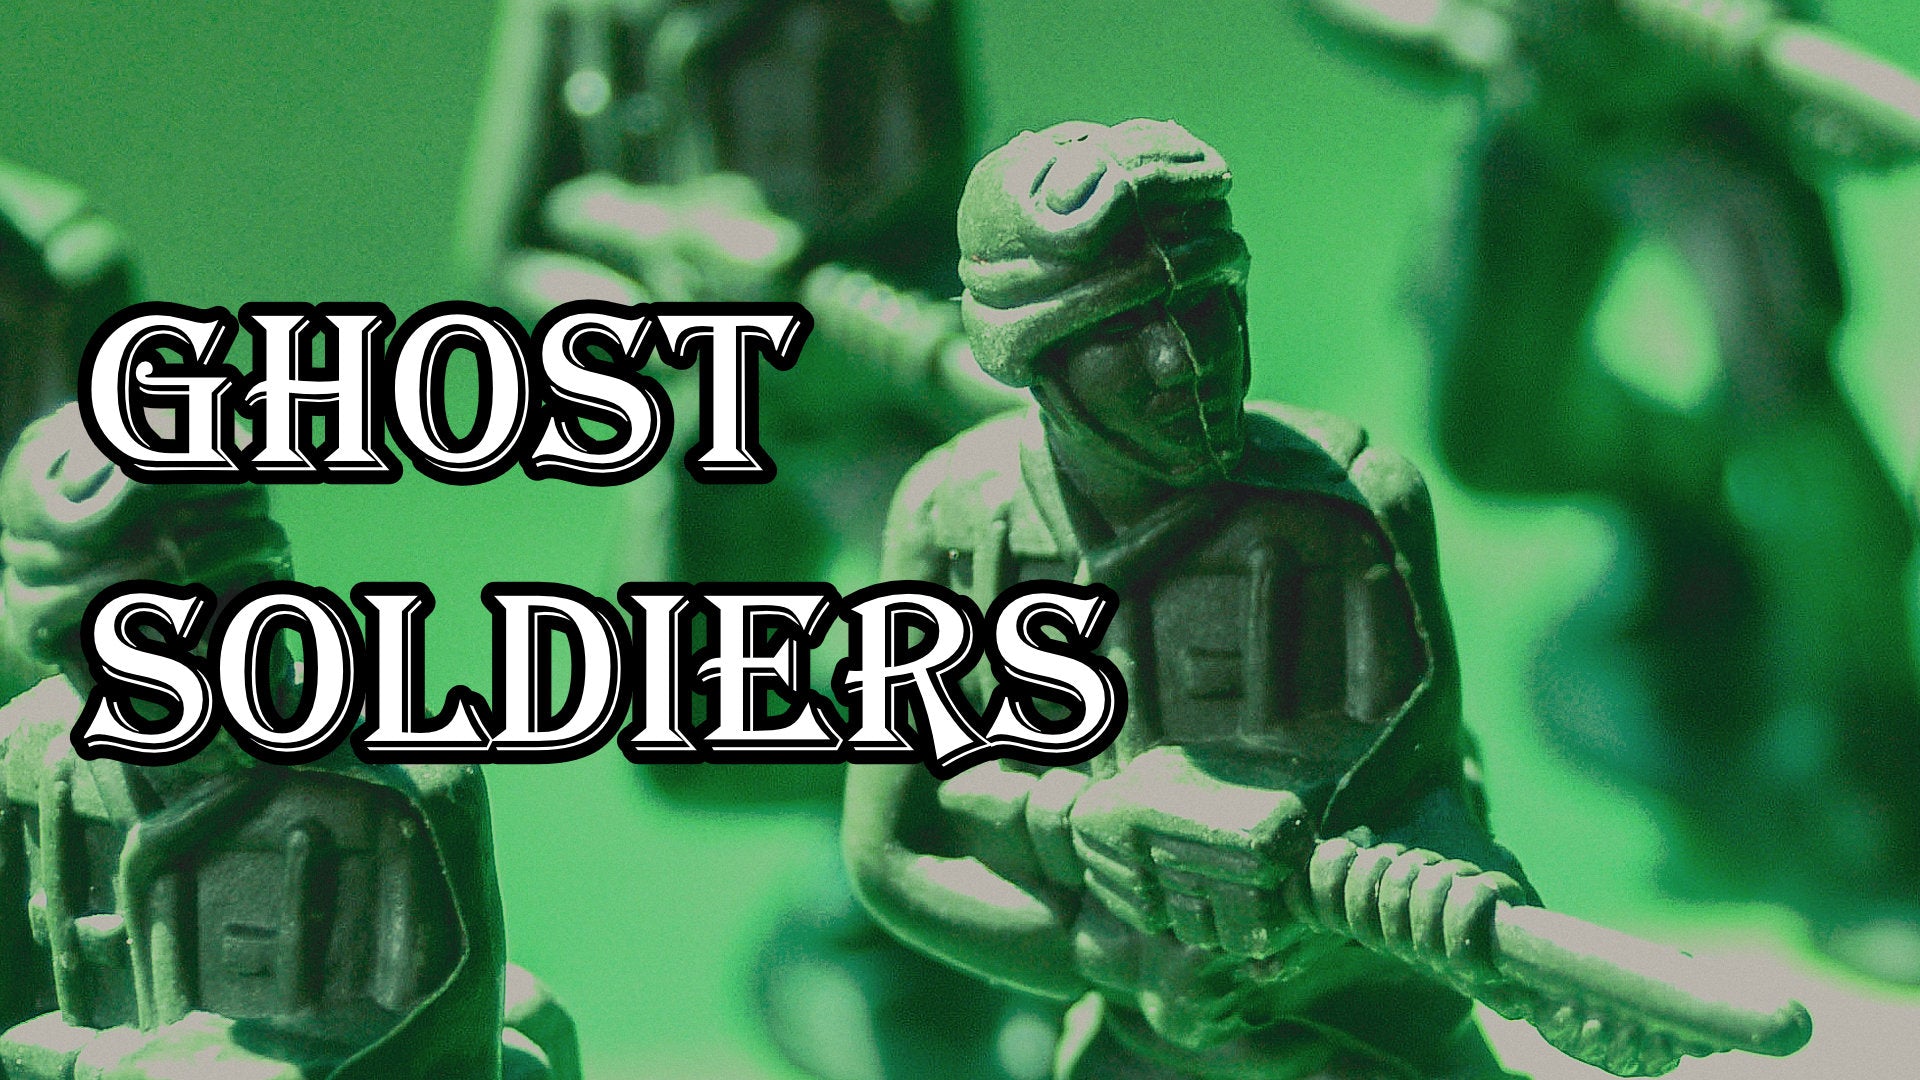 
          Recruiting The Ghost Soldiers
        